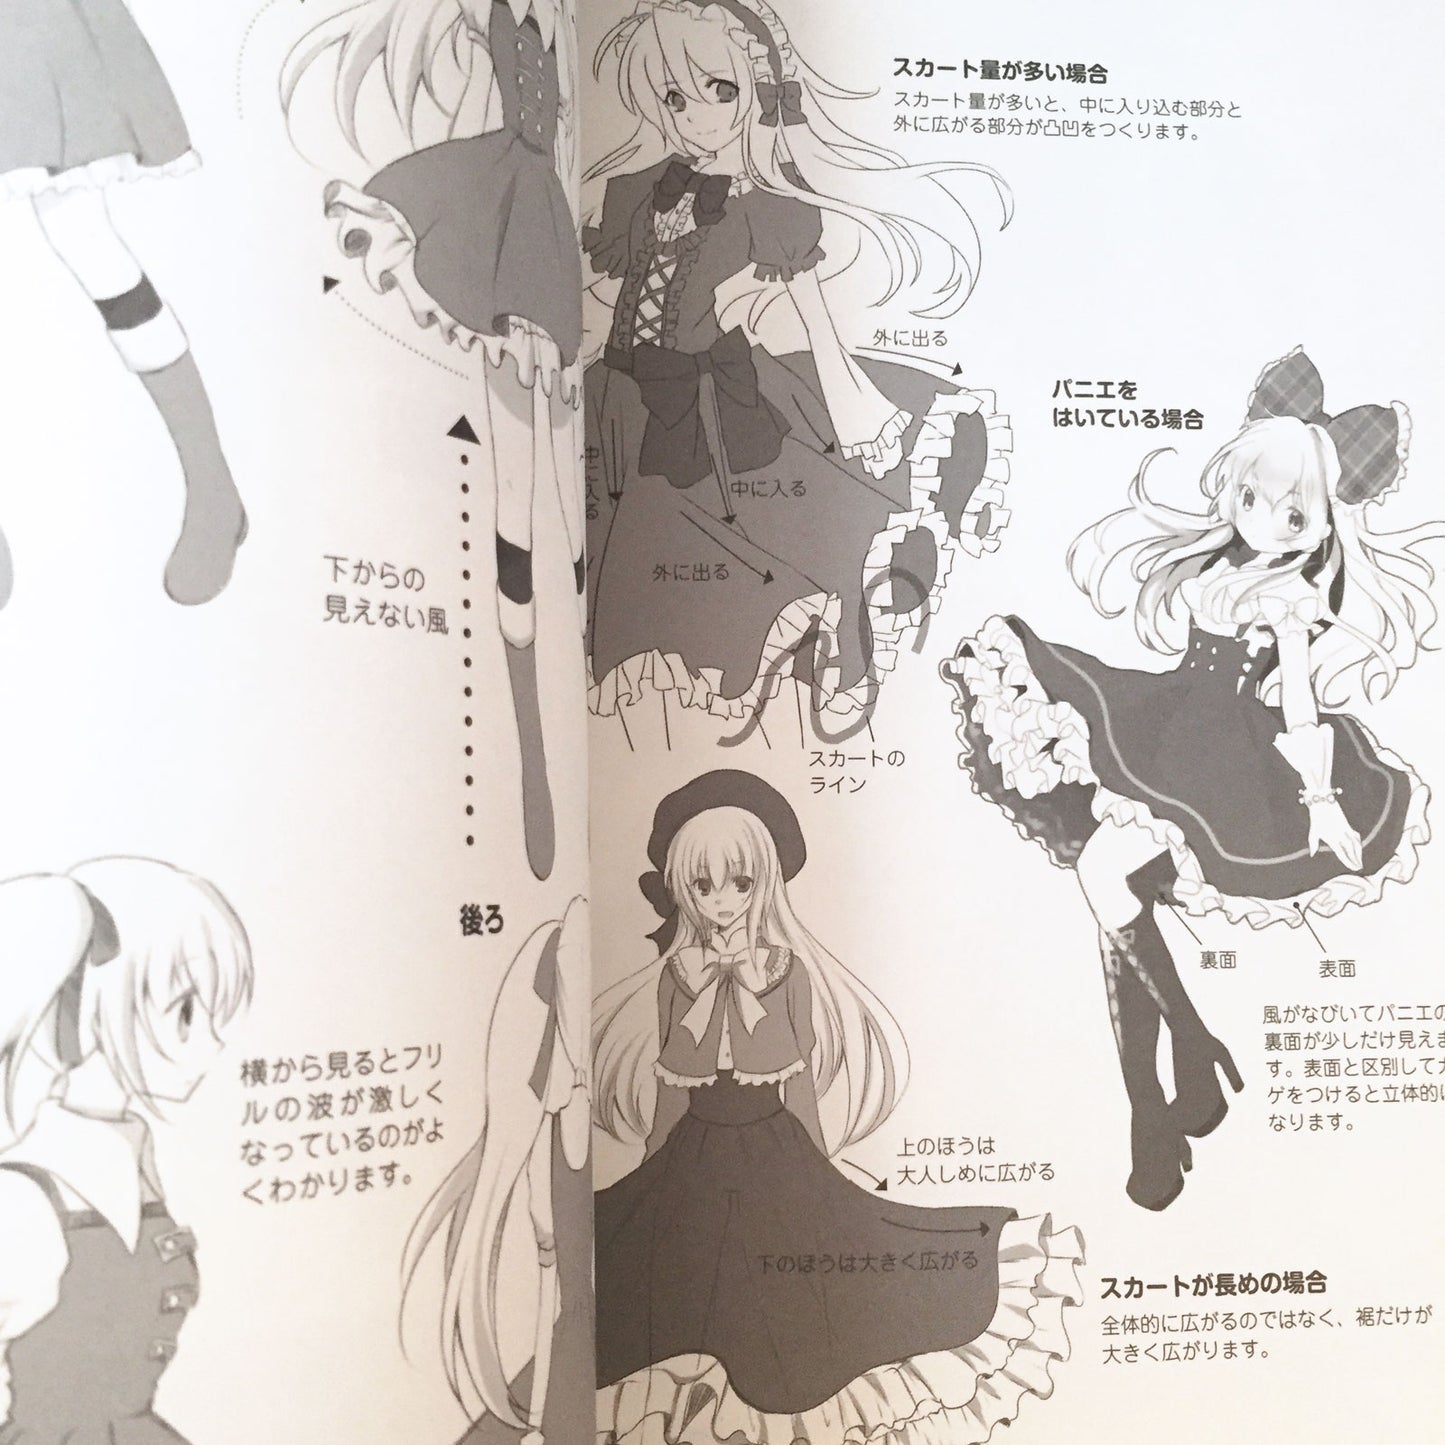 How To Draw Moe Lolita Fashion, From basic body to costume